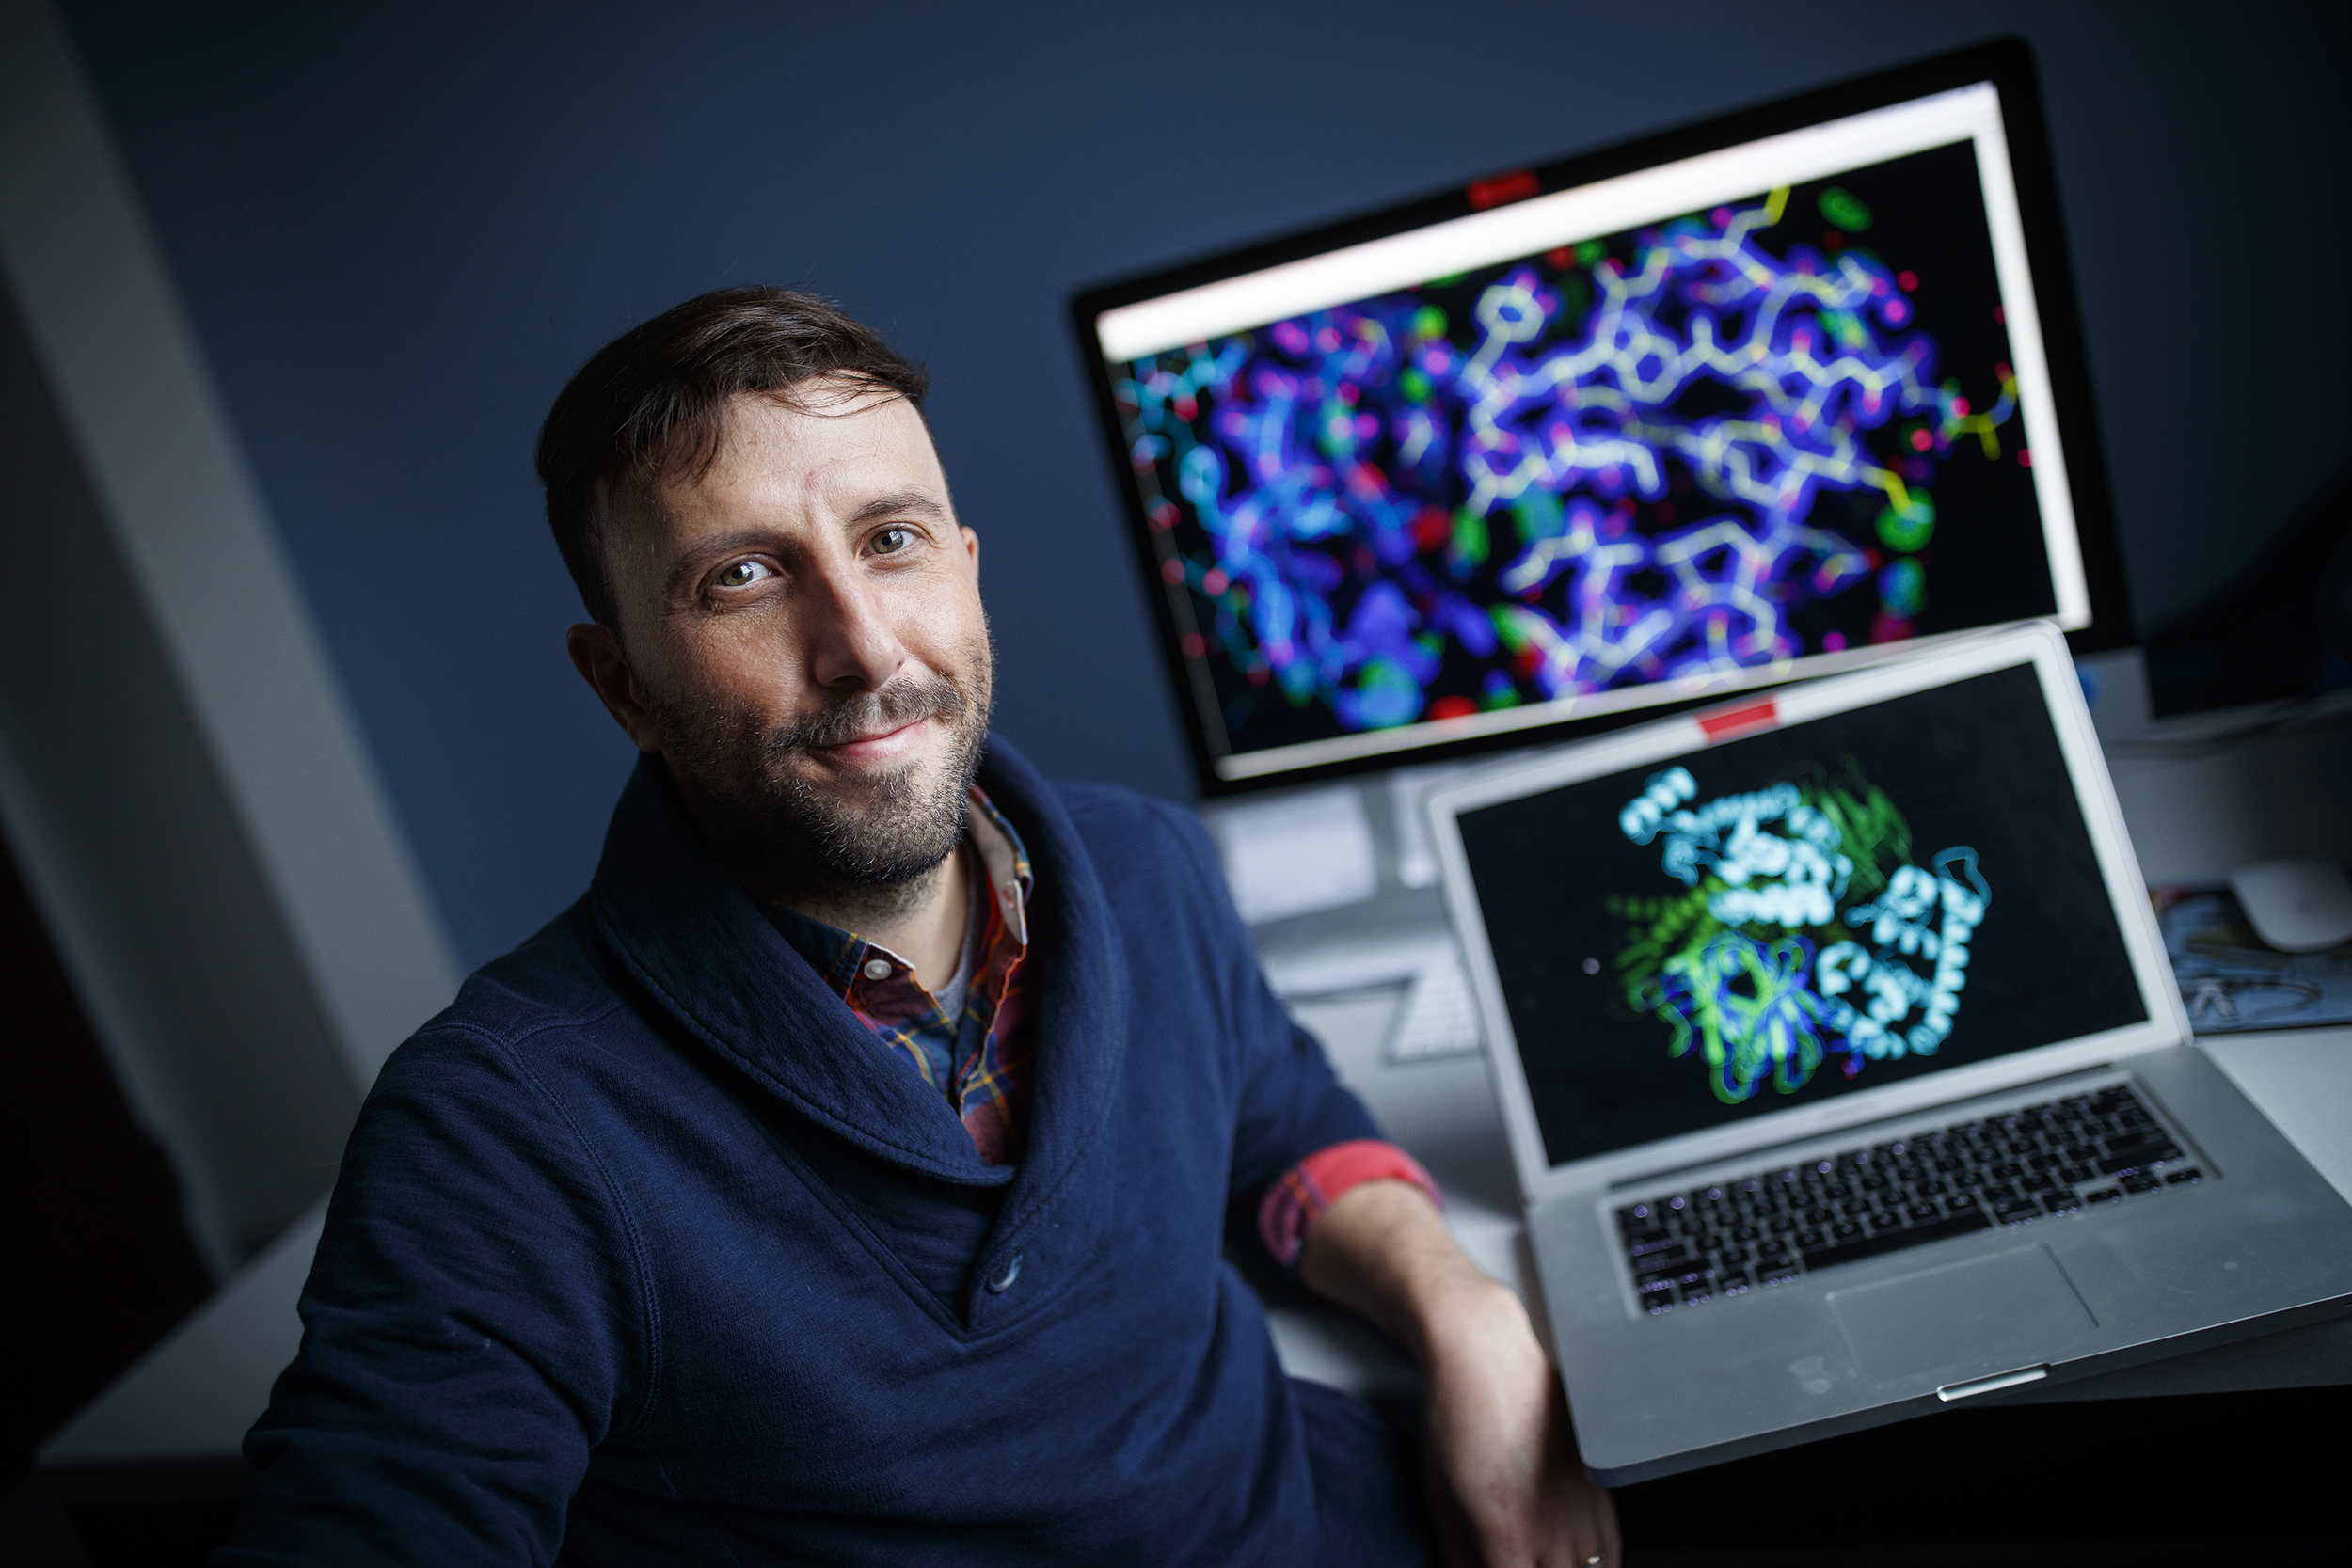 Photo Credit: A team of Husker biochemists led by Alex Vecchio has earned a five-year, $1.8 million grant from the Department of Health and Human Services’ National Institute of General Medical Sciences to understand how the structure and assembly of membrane proteins influence the function and dysfunction of tight junctions.